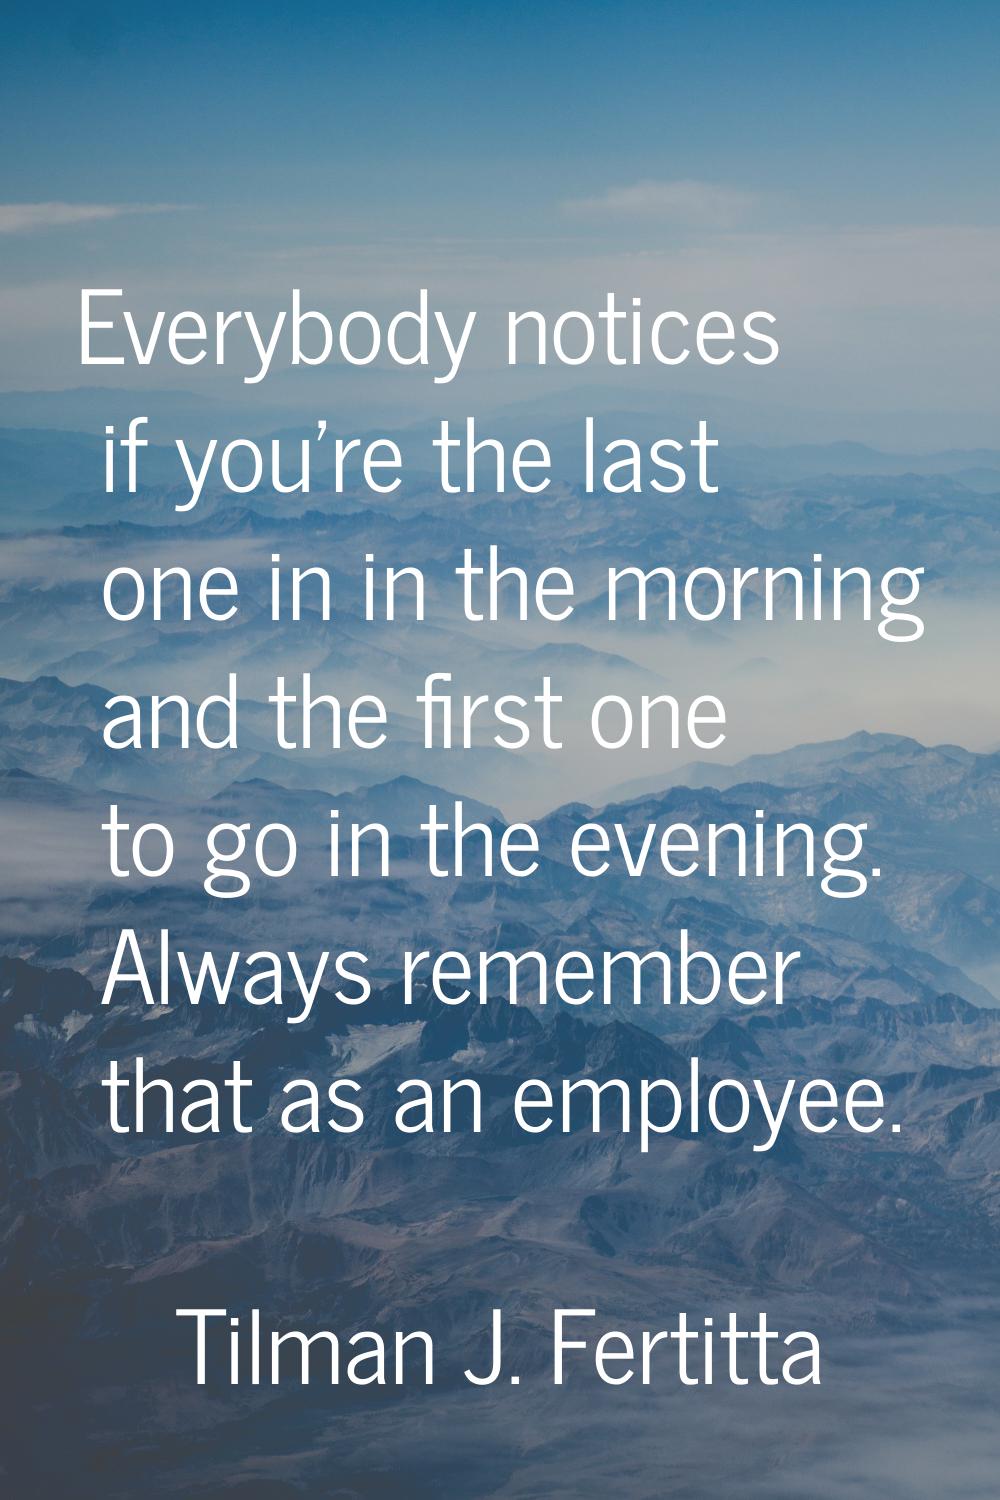 Everybody notices if you're the last one in in the morning and the first one to go in the evening. 